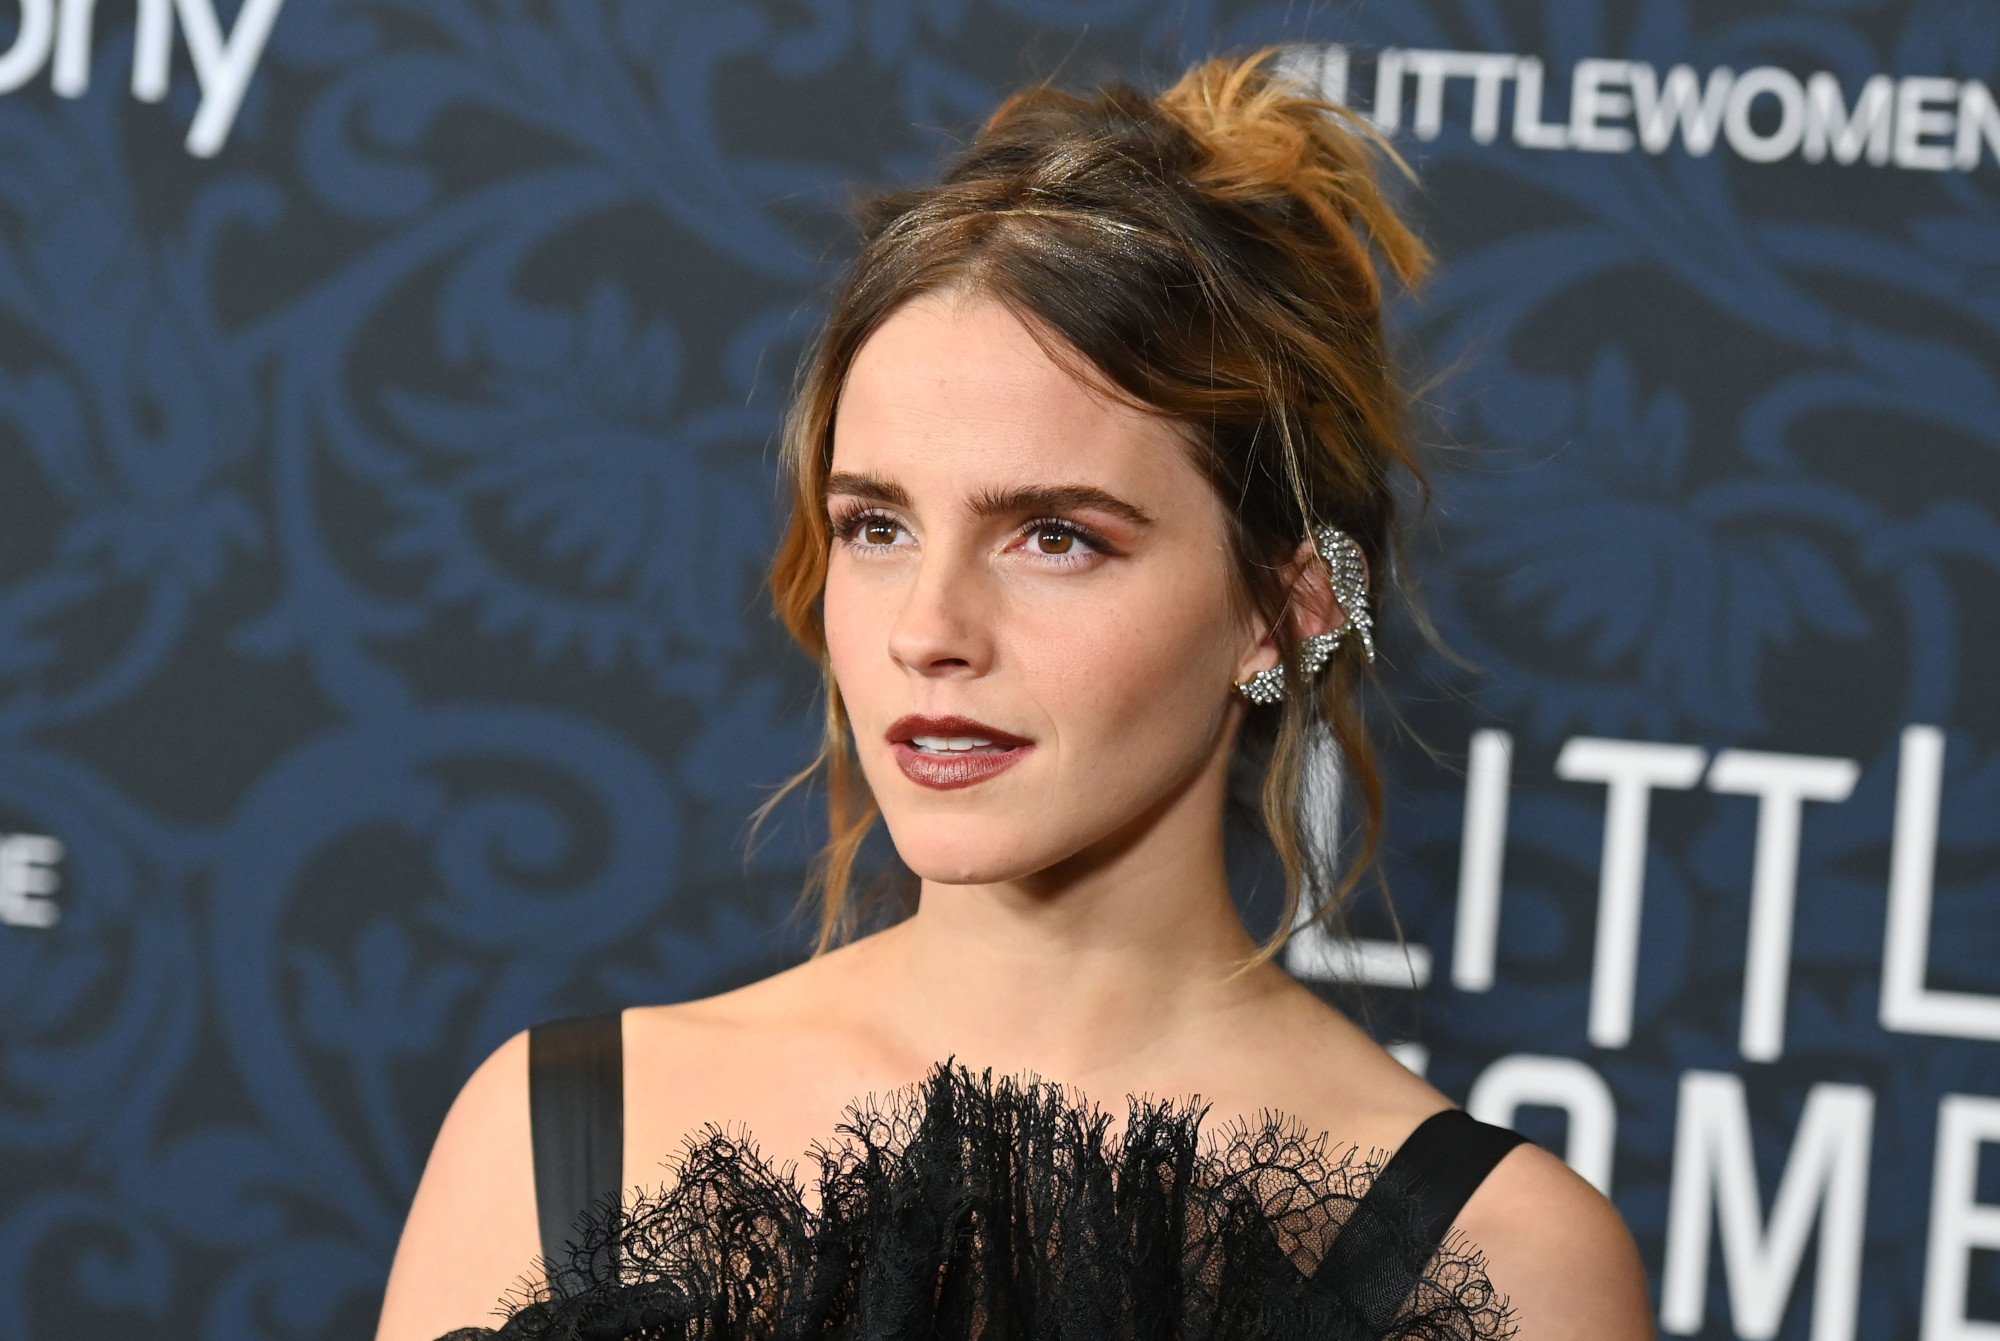 Emma Watson's 'Harry Potter' Body Double Reminisces About Her 'Big and  Frizzy' Hermione Granger Hair: 'It Took About 3 Hours to Do'